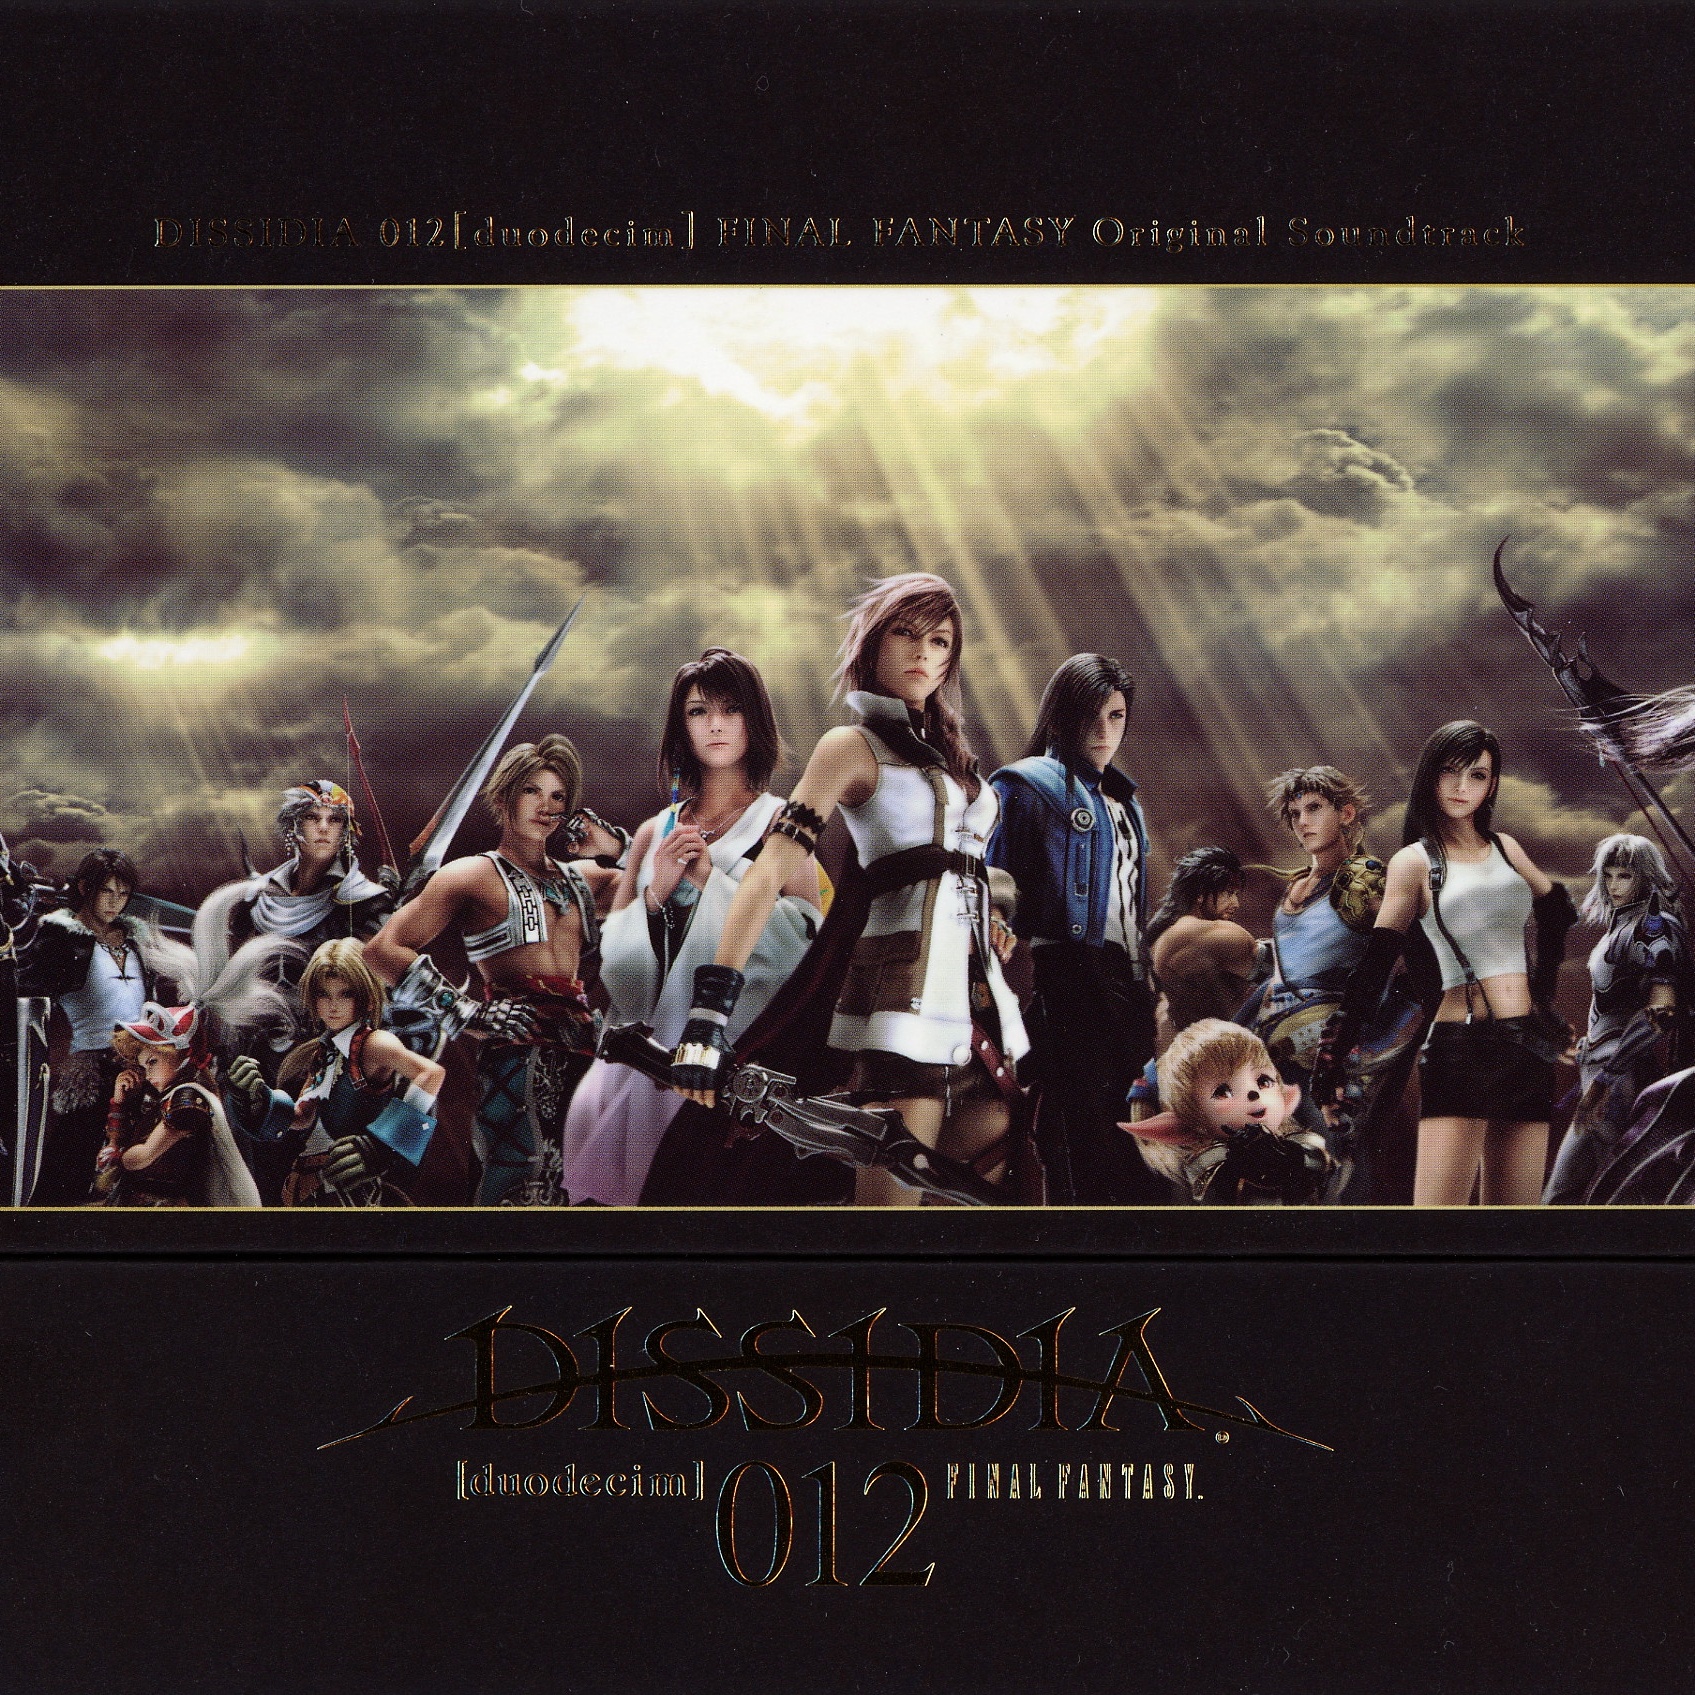 「God in Fire」 from DISSIDIA 012[duodecim] FINAL FANTASY